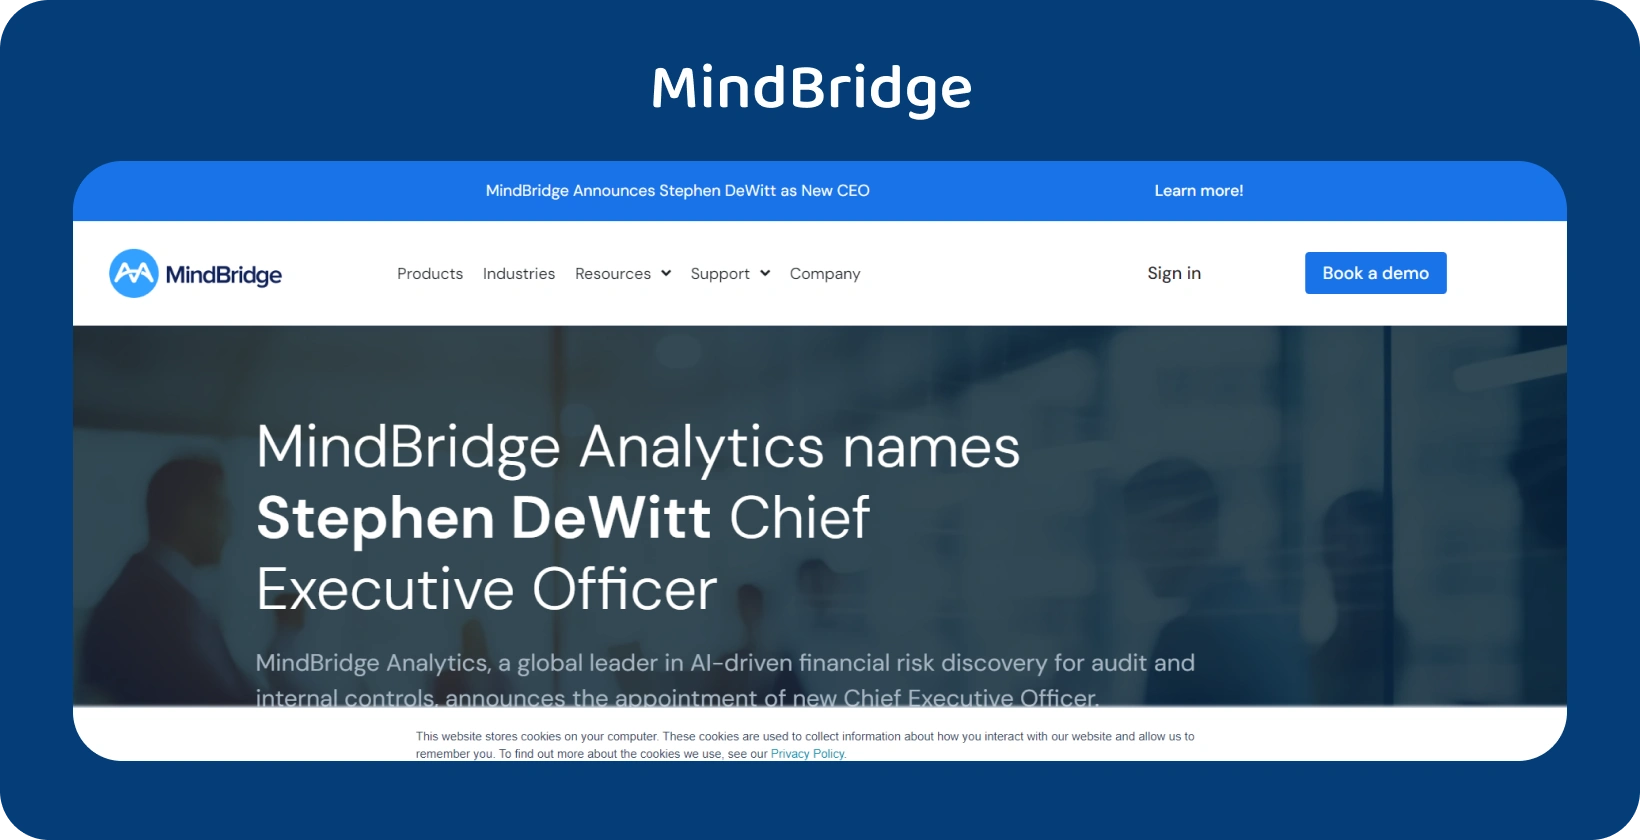 The MindBridge Analytics homepage proudly announces Stephen DeWitt as its new CEO, leading the company's forward journey.